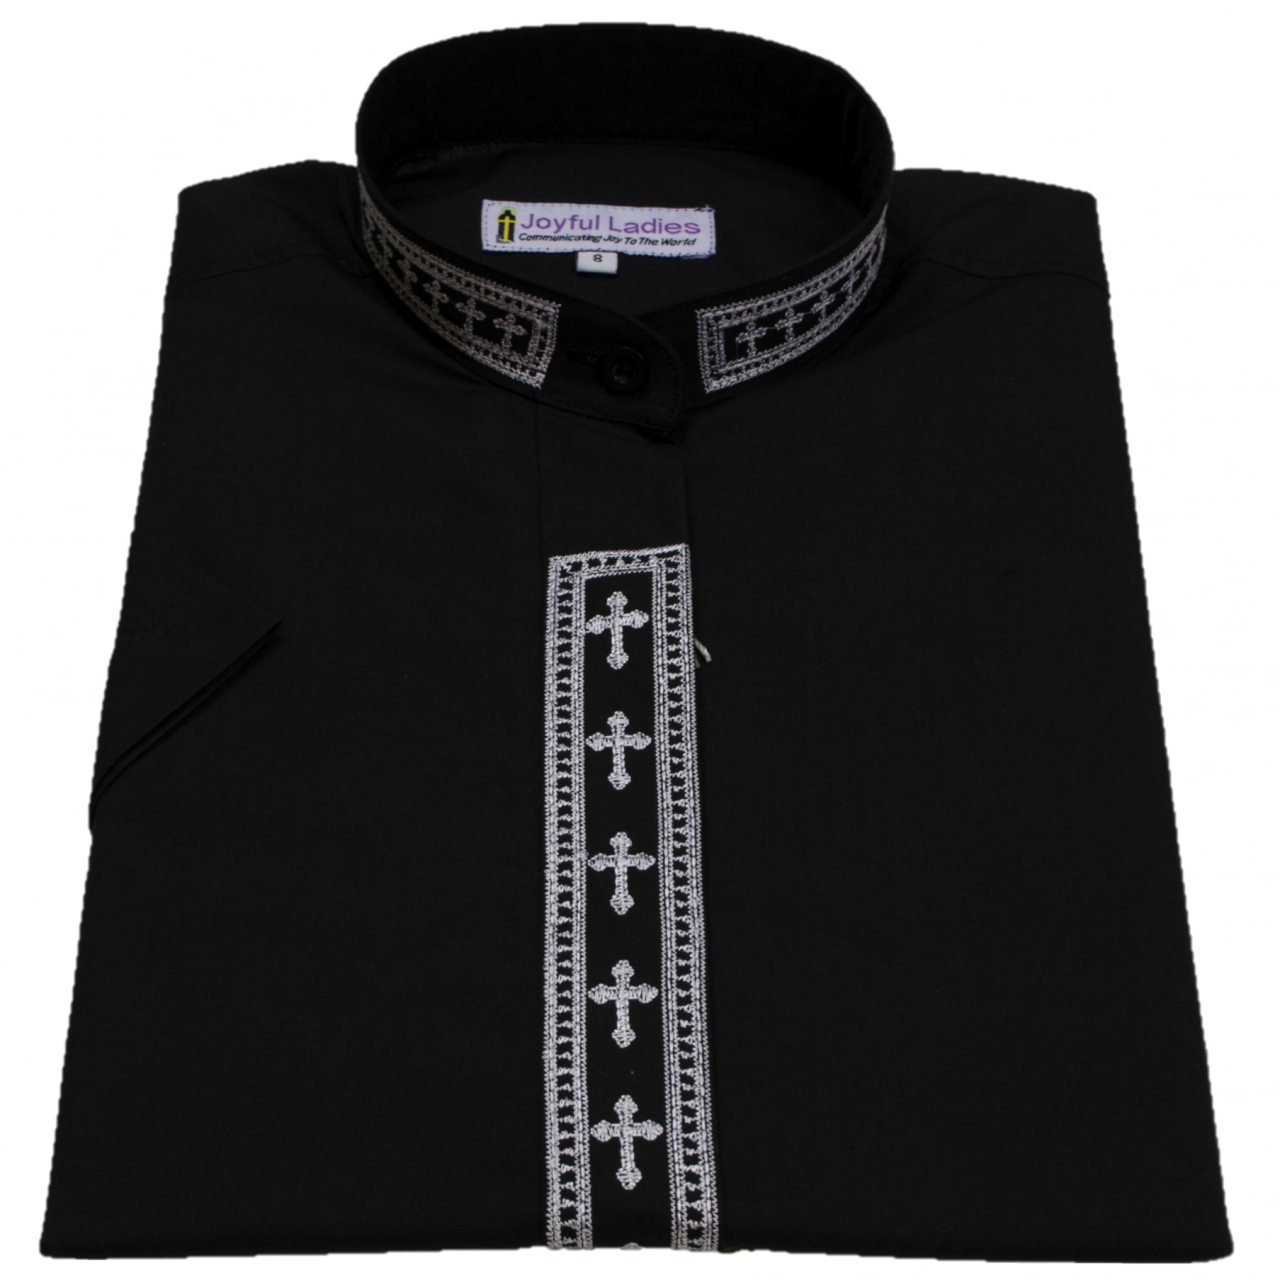 753. Women's Short-Sleeve Clergy Shirt With Fine Embroidery - Black/White